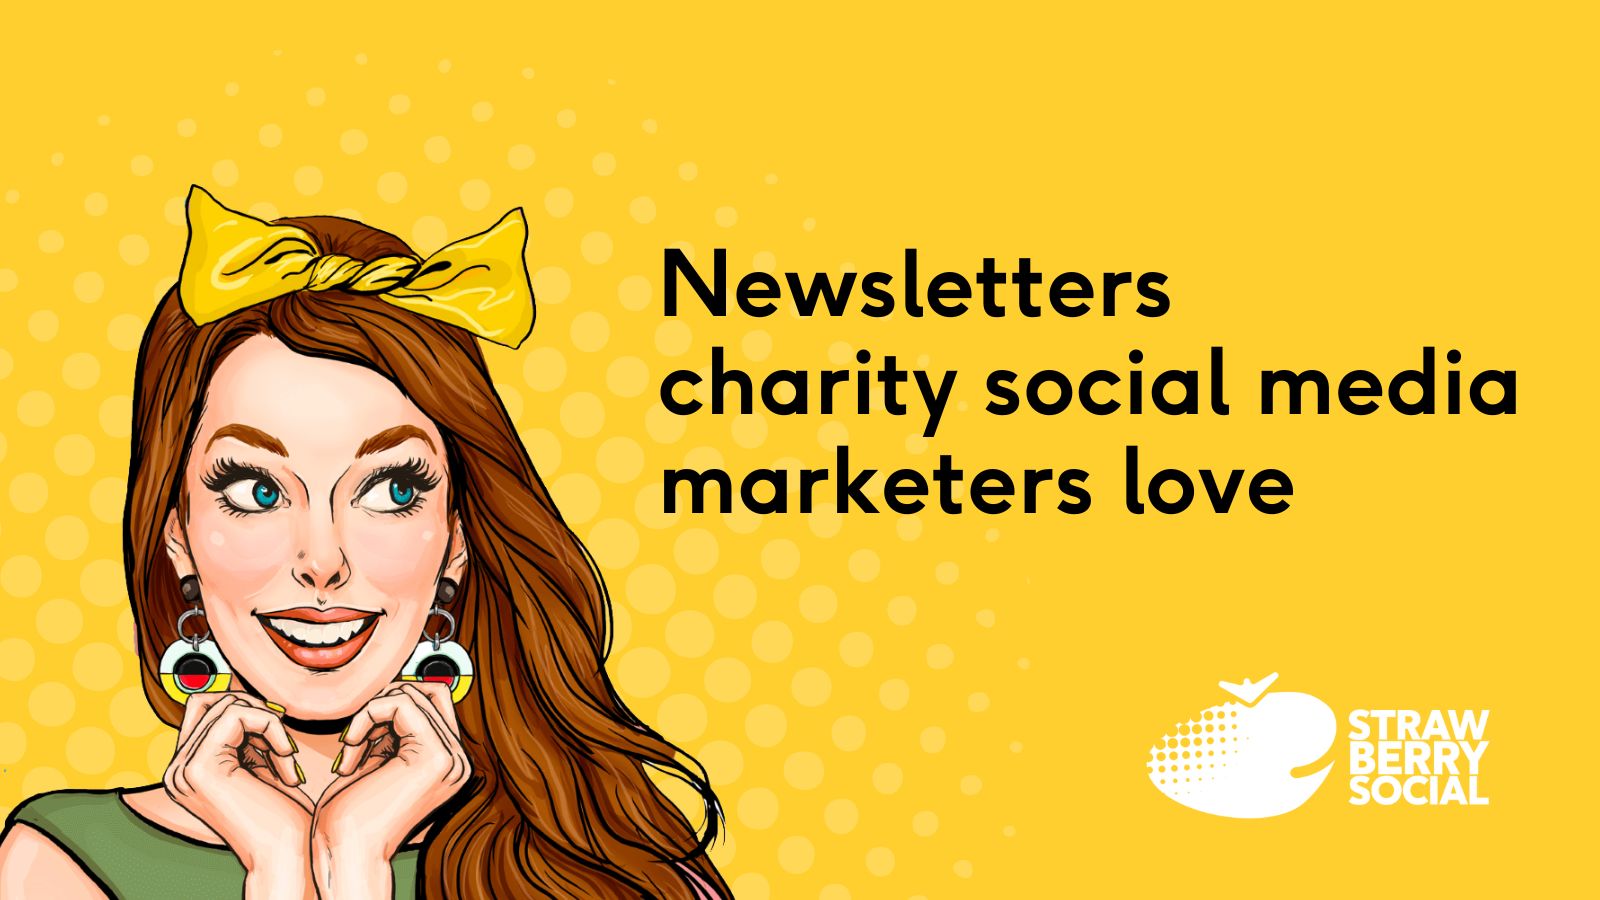 Woman with long brown hair and yellow bow looks up to the right at text that says 'Newsletters that charity social media marketers love'